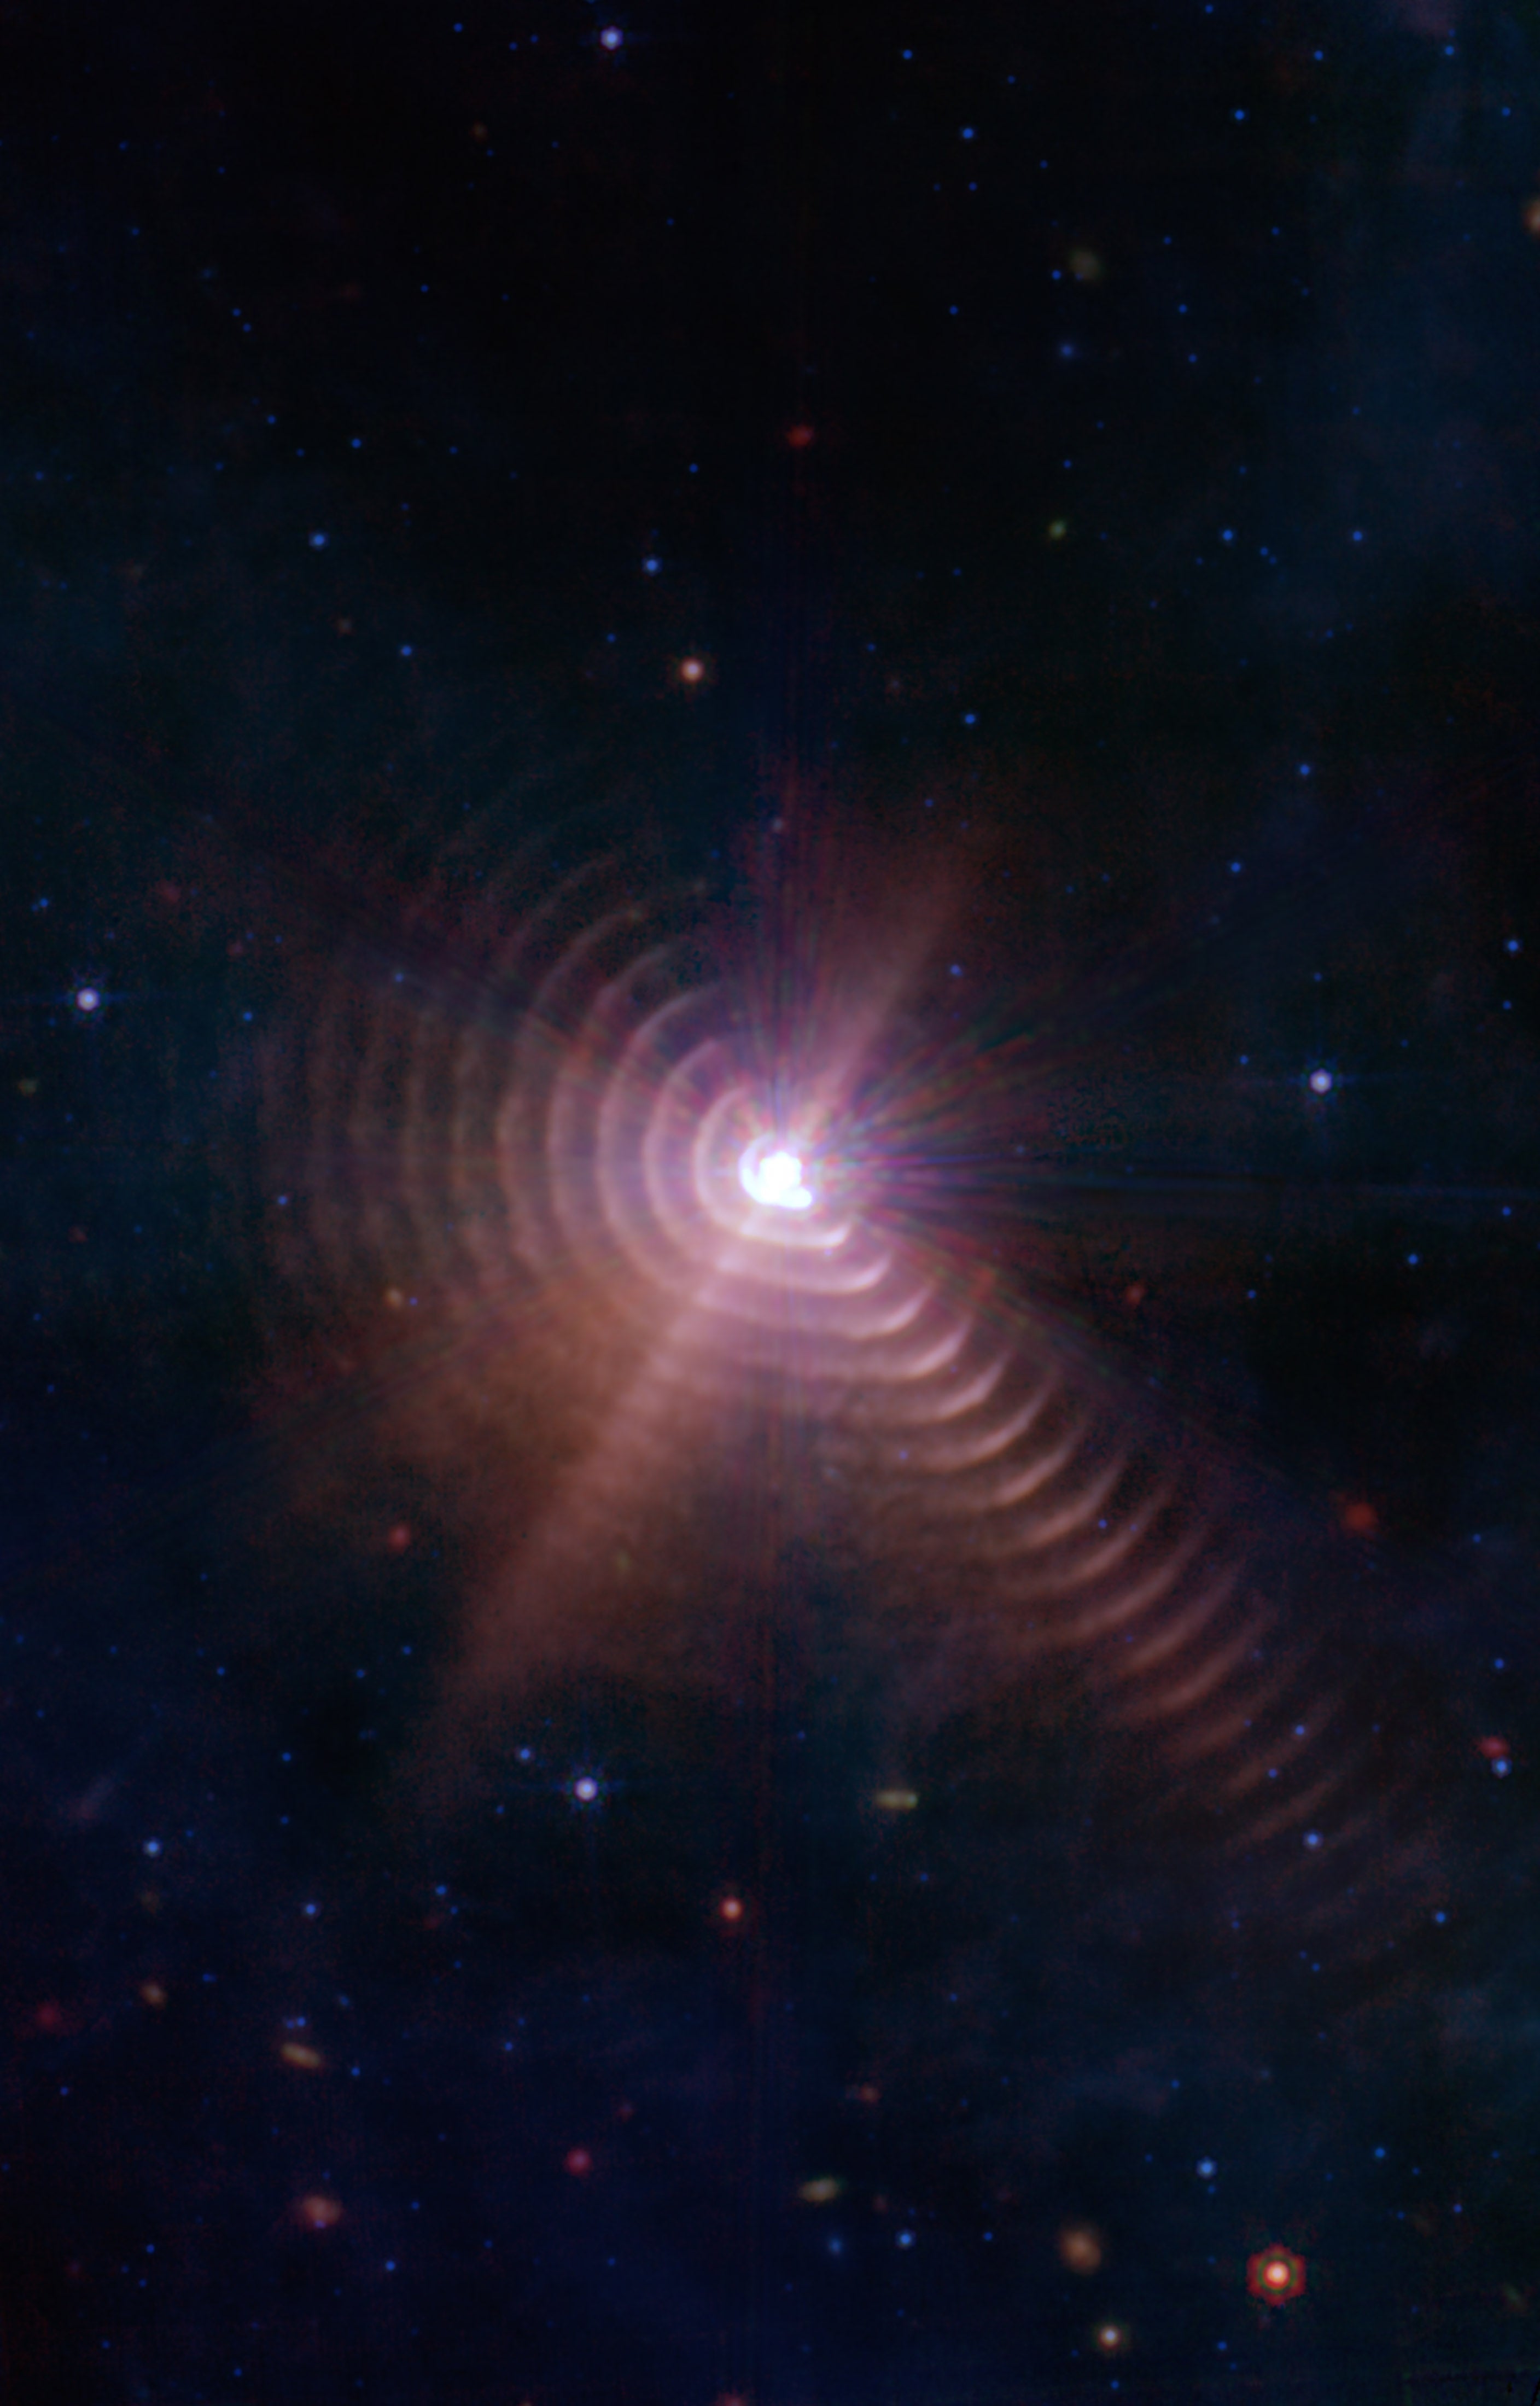 Rings of dust are blown away from the binary star WR140, pushed across the cosmos by powerful solar wind